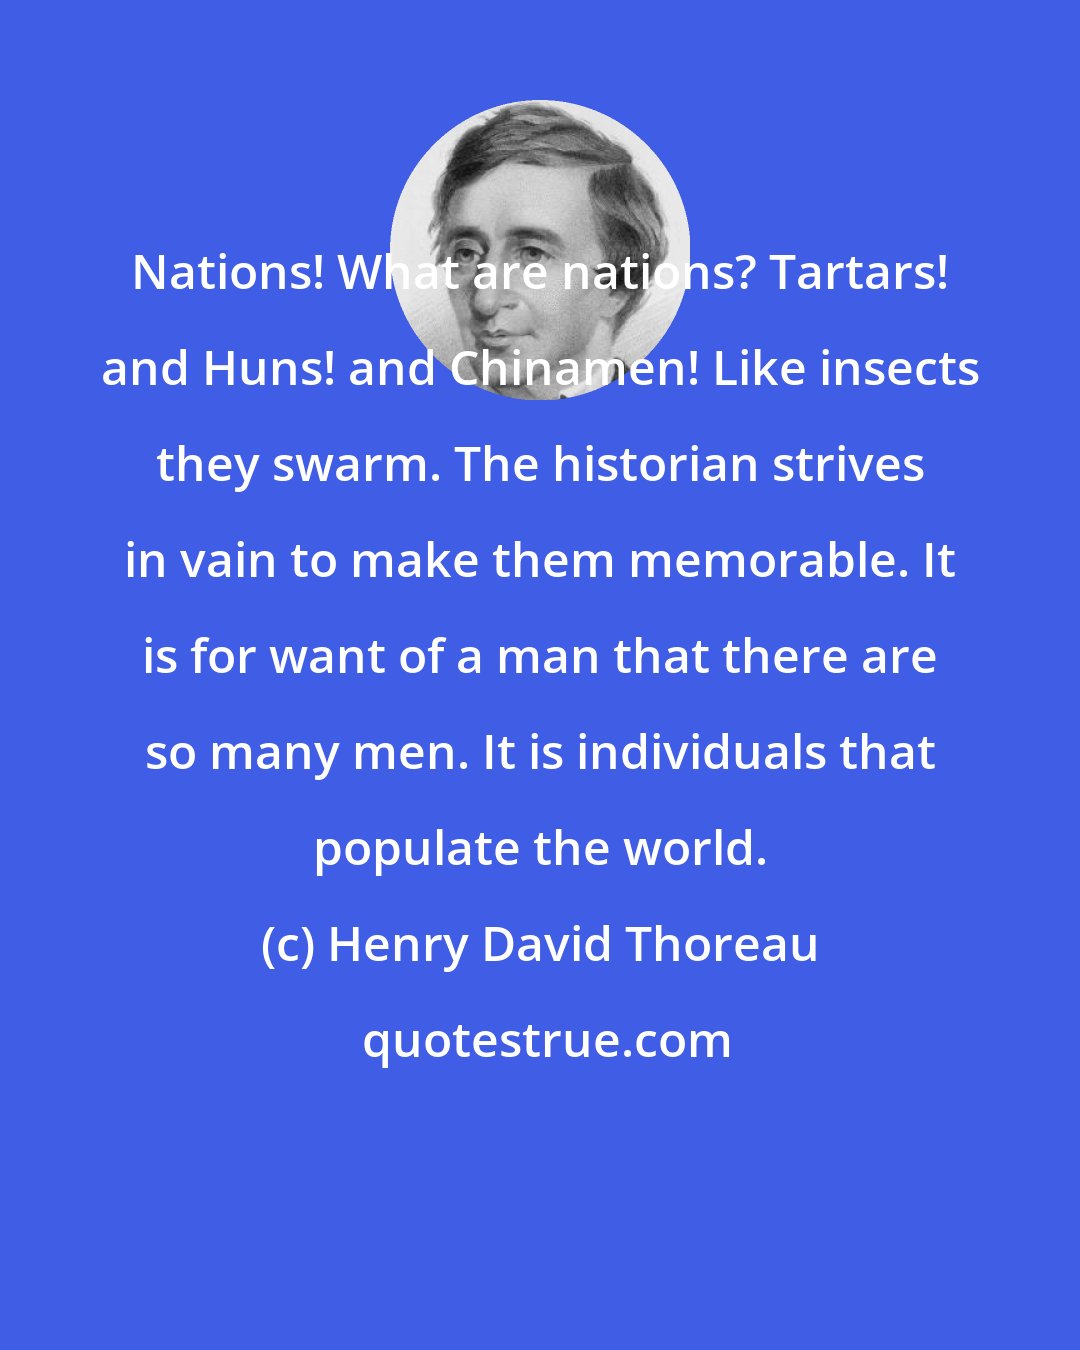 Henry David Thoreau: Nations! What are nations? Tartars! and Huns! and Chinamen! Like insects they swarm. The historian strives in vain to make them memorable. It is for want of a man that there are so many men. It is individuals that populate the world.